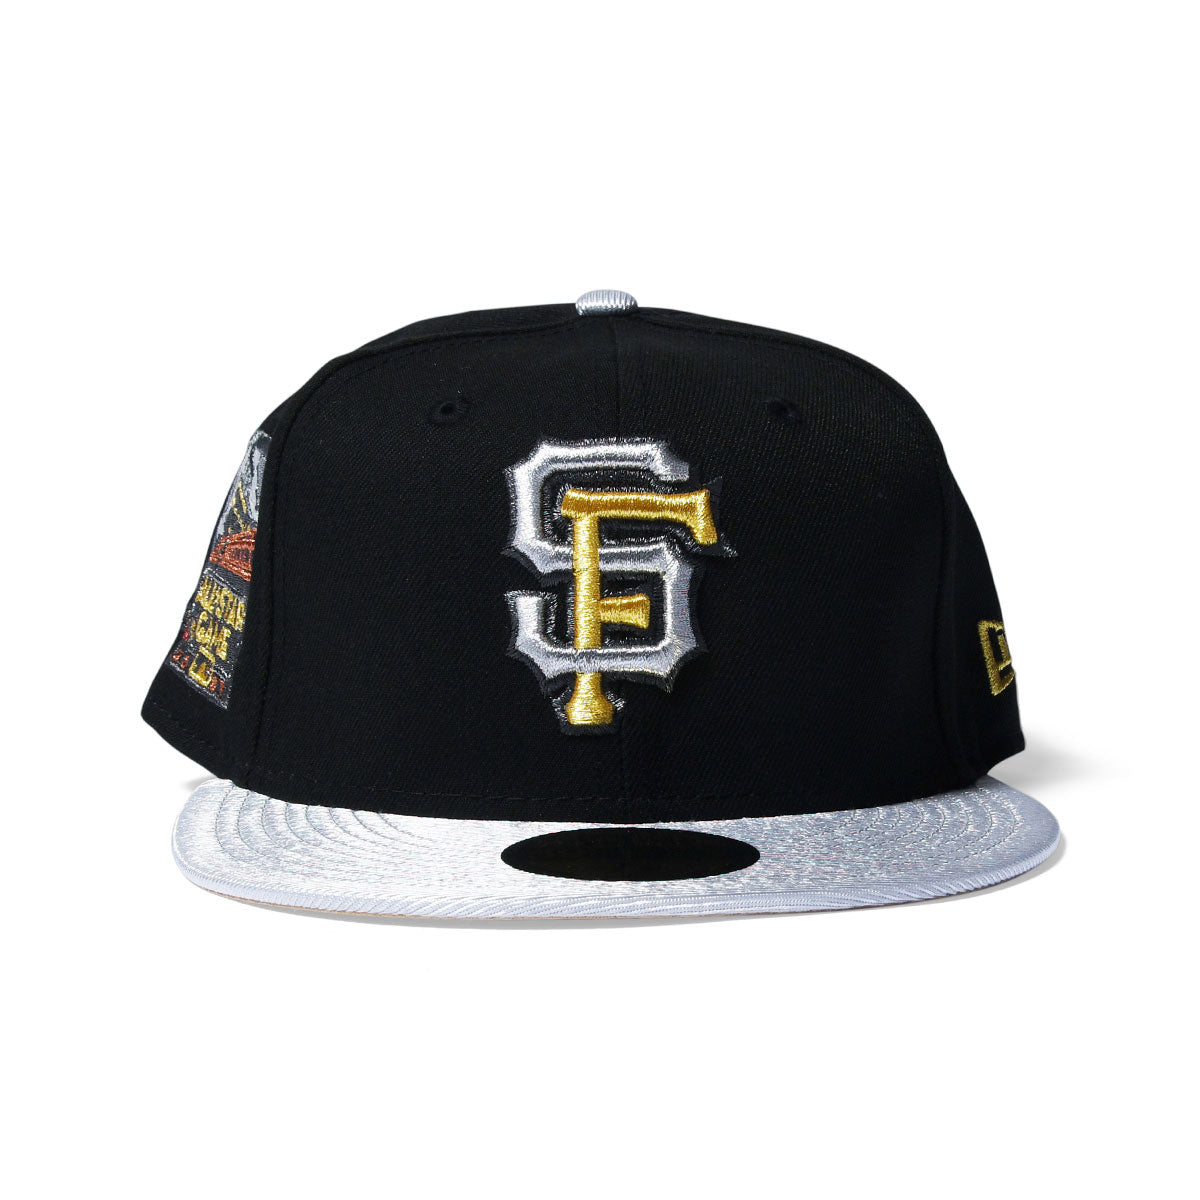 NEWERA-279 San Francisco Giants 2007 ALL-STAR GAME 59FIFTY